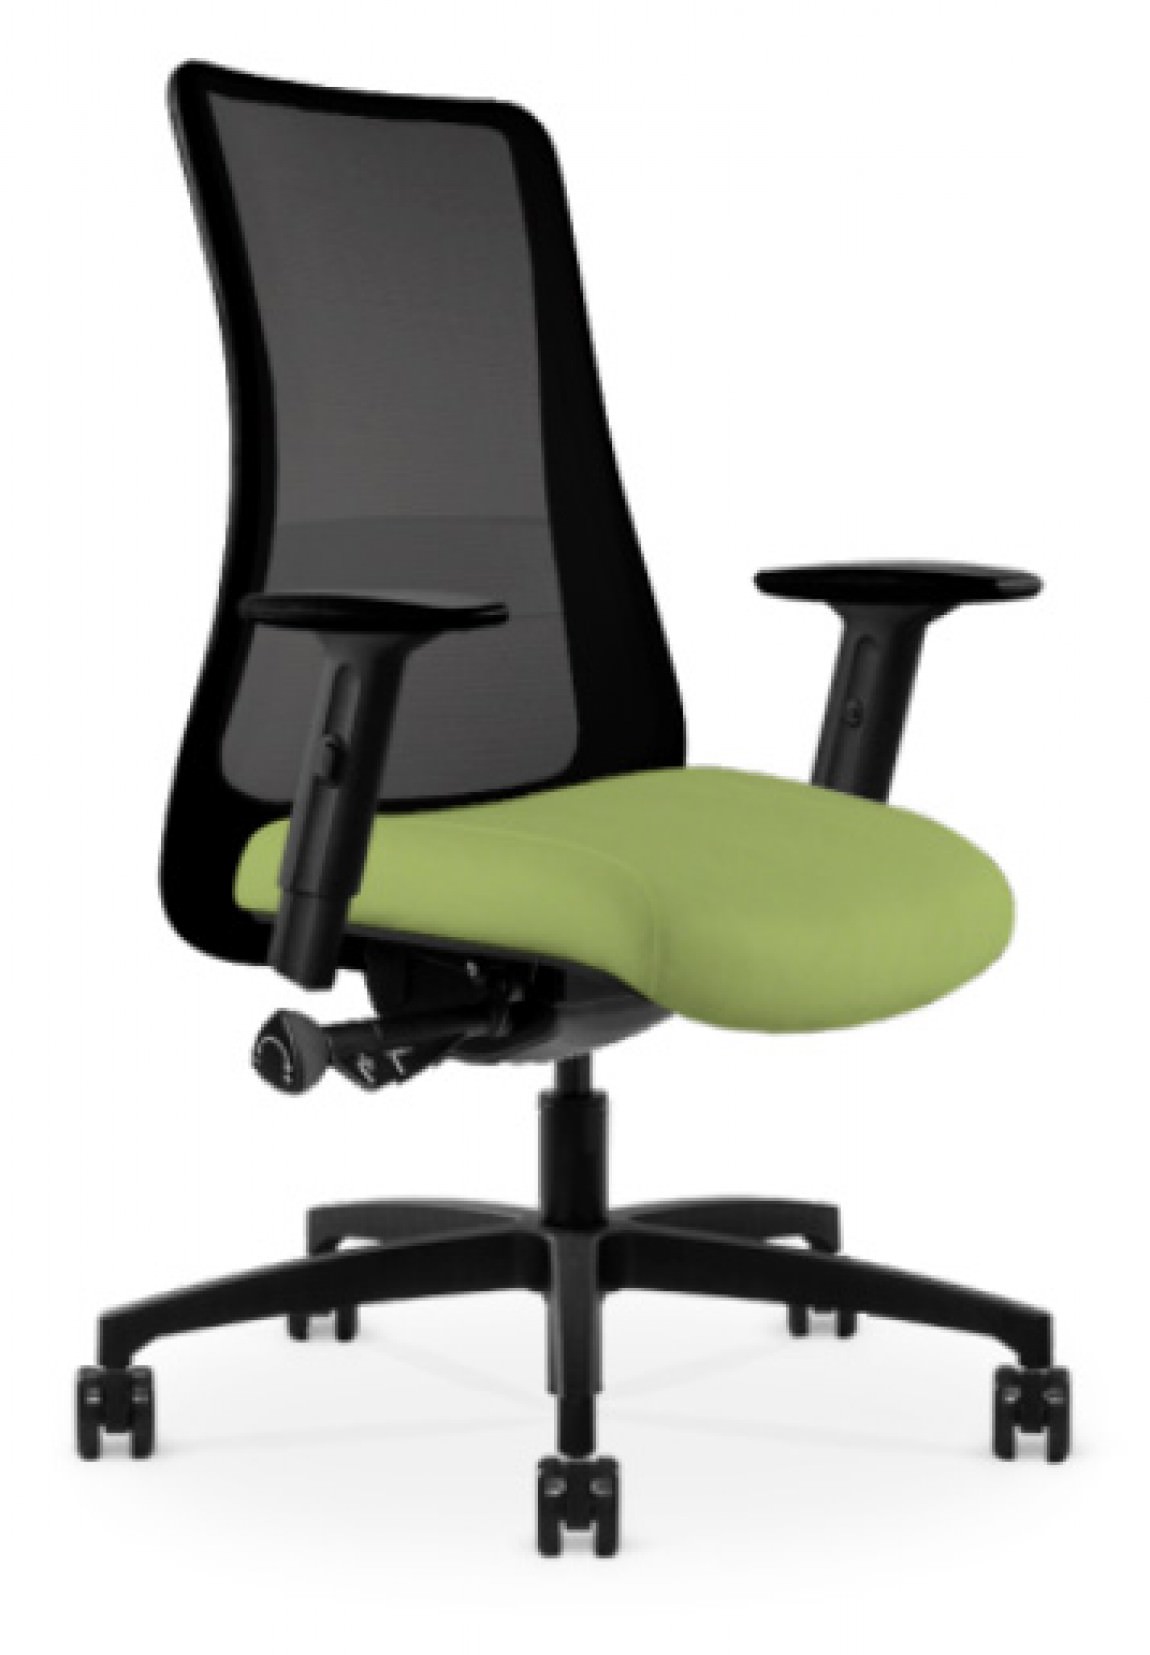 Black Copper Mesh Antimicrobial Office Chair w/ Bright Green Seat